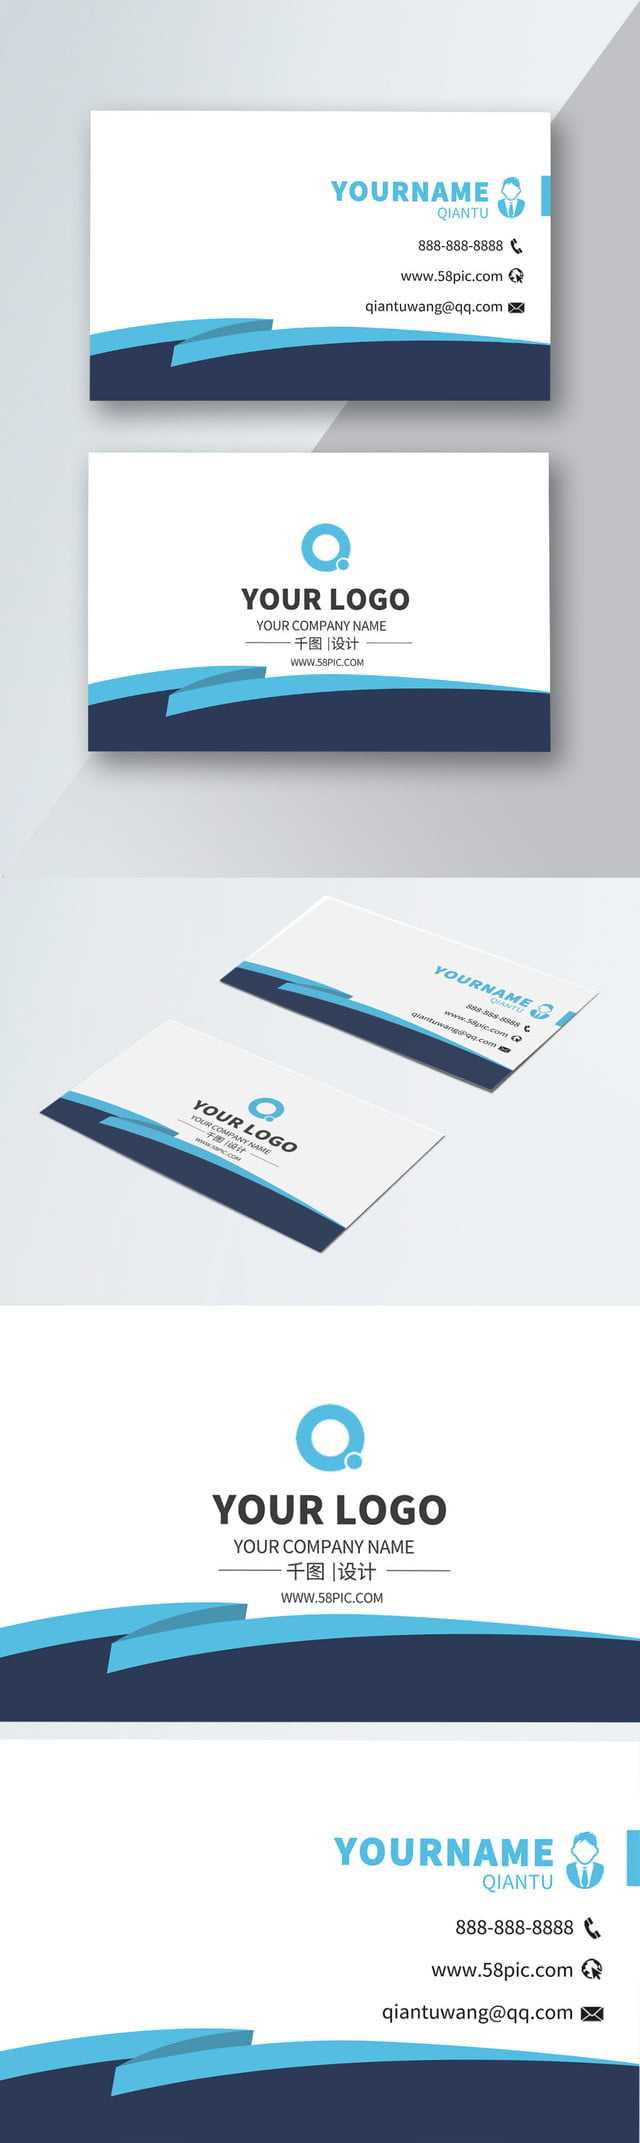 Advertising Company Business Card Material Download In Advertising Cards Templates